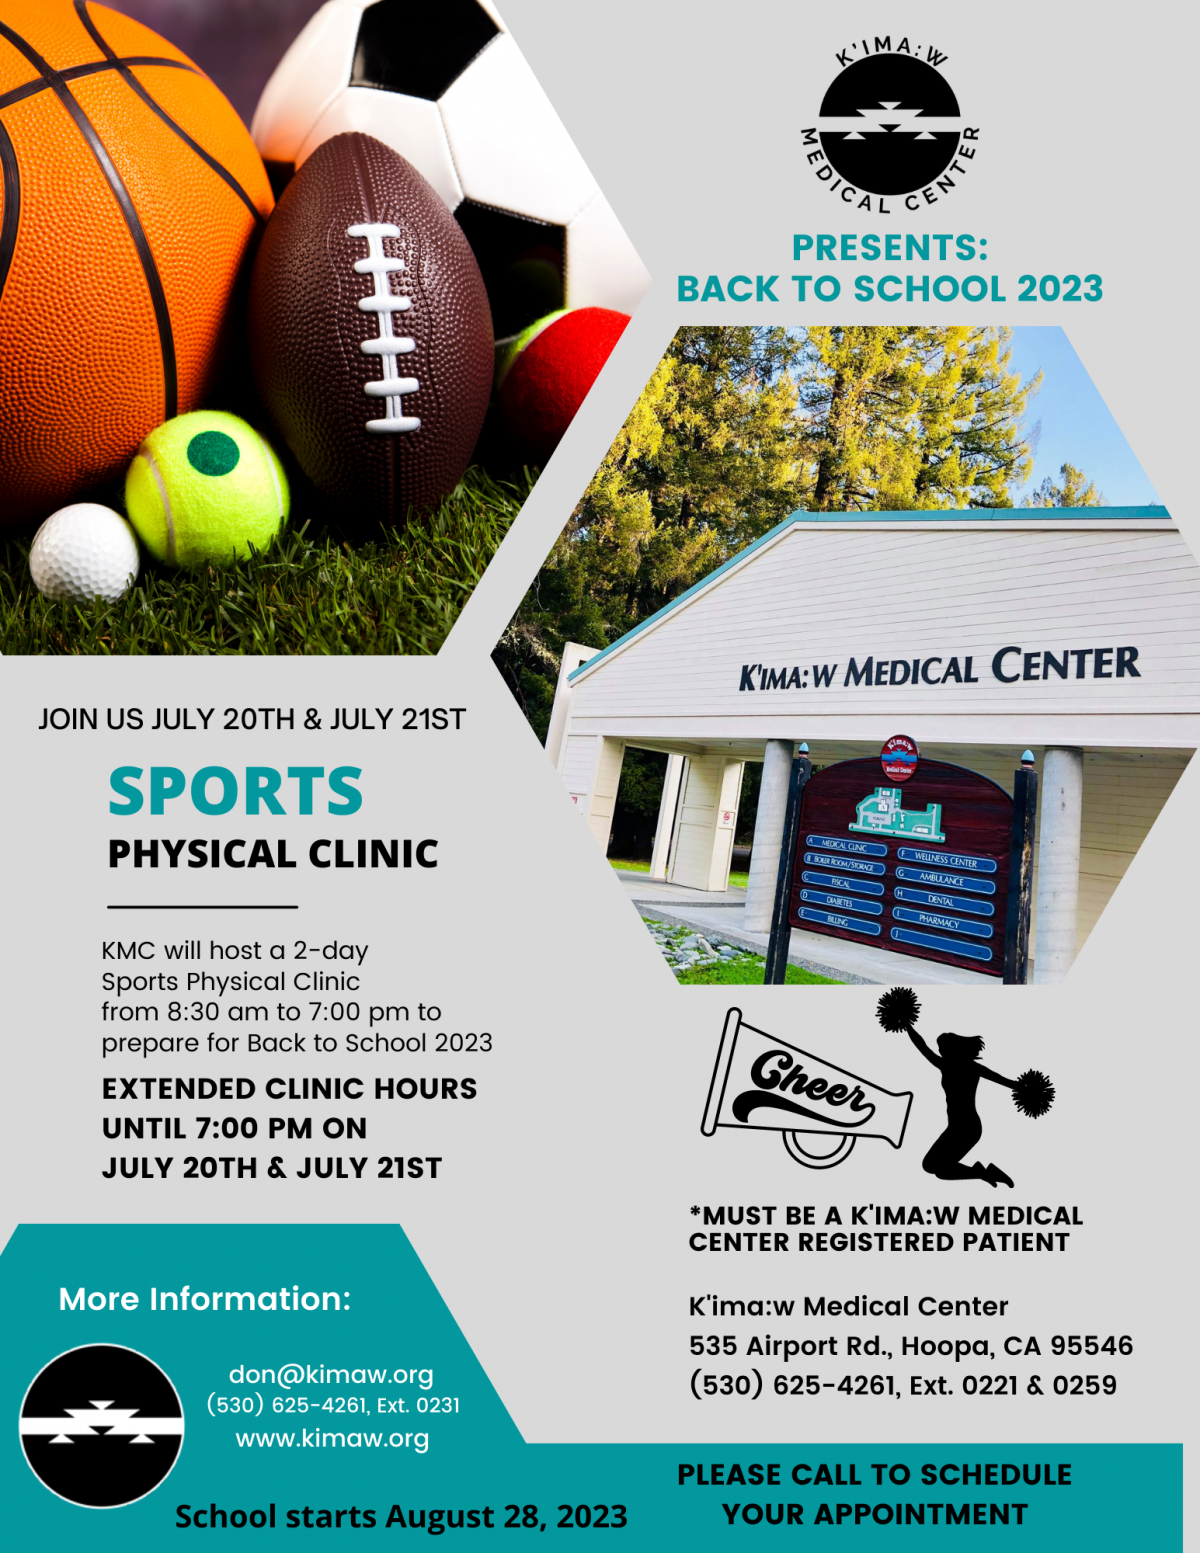 KMC 2023 Back to School Sports Physicals Clinic